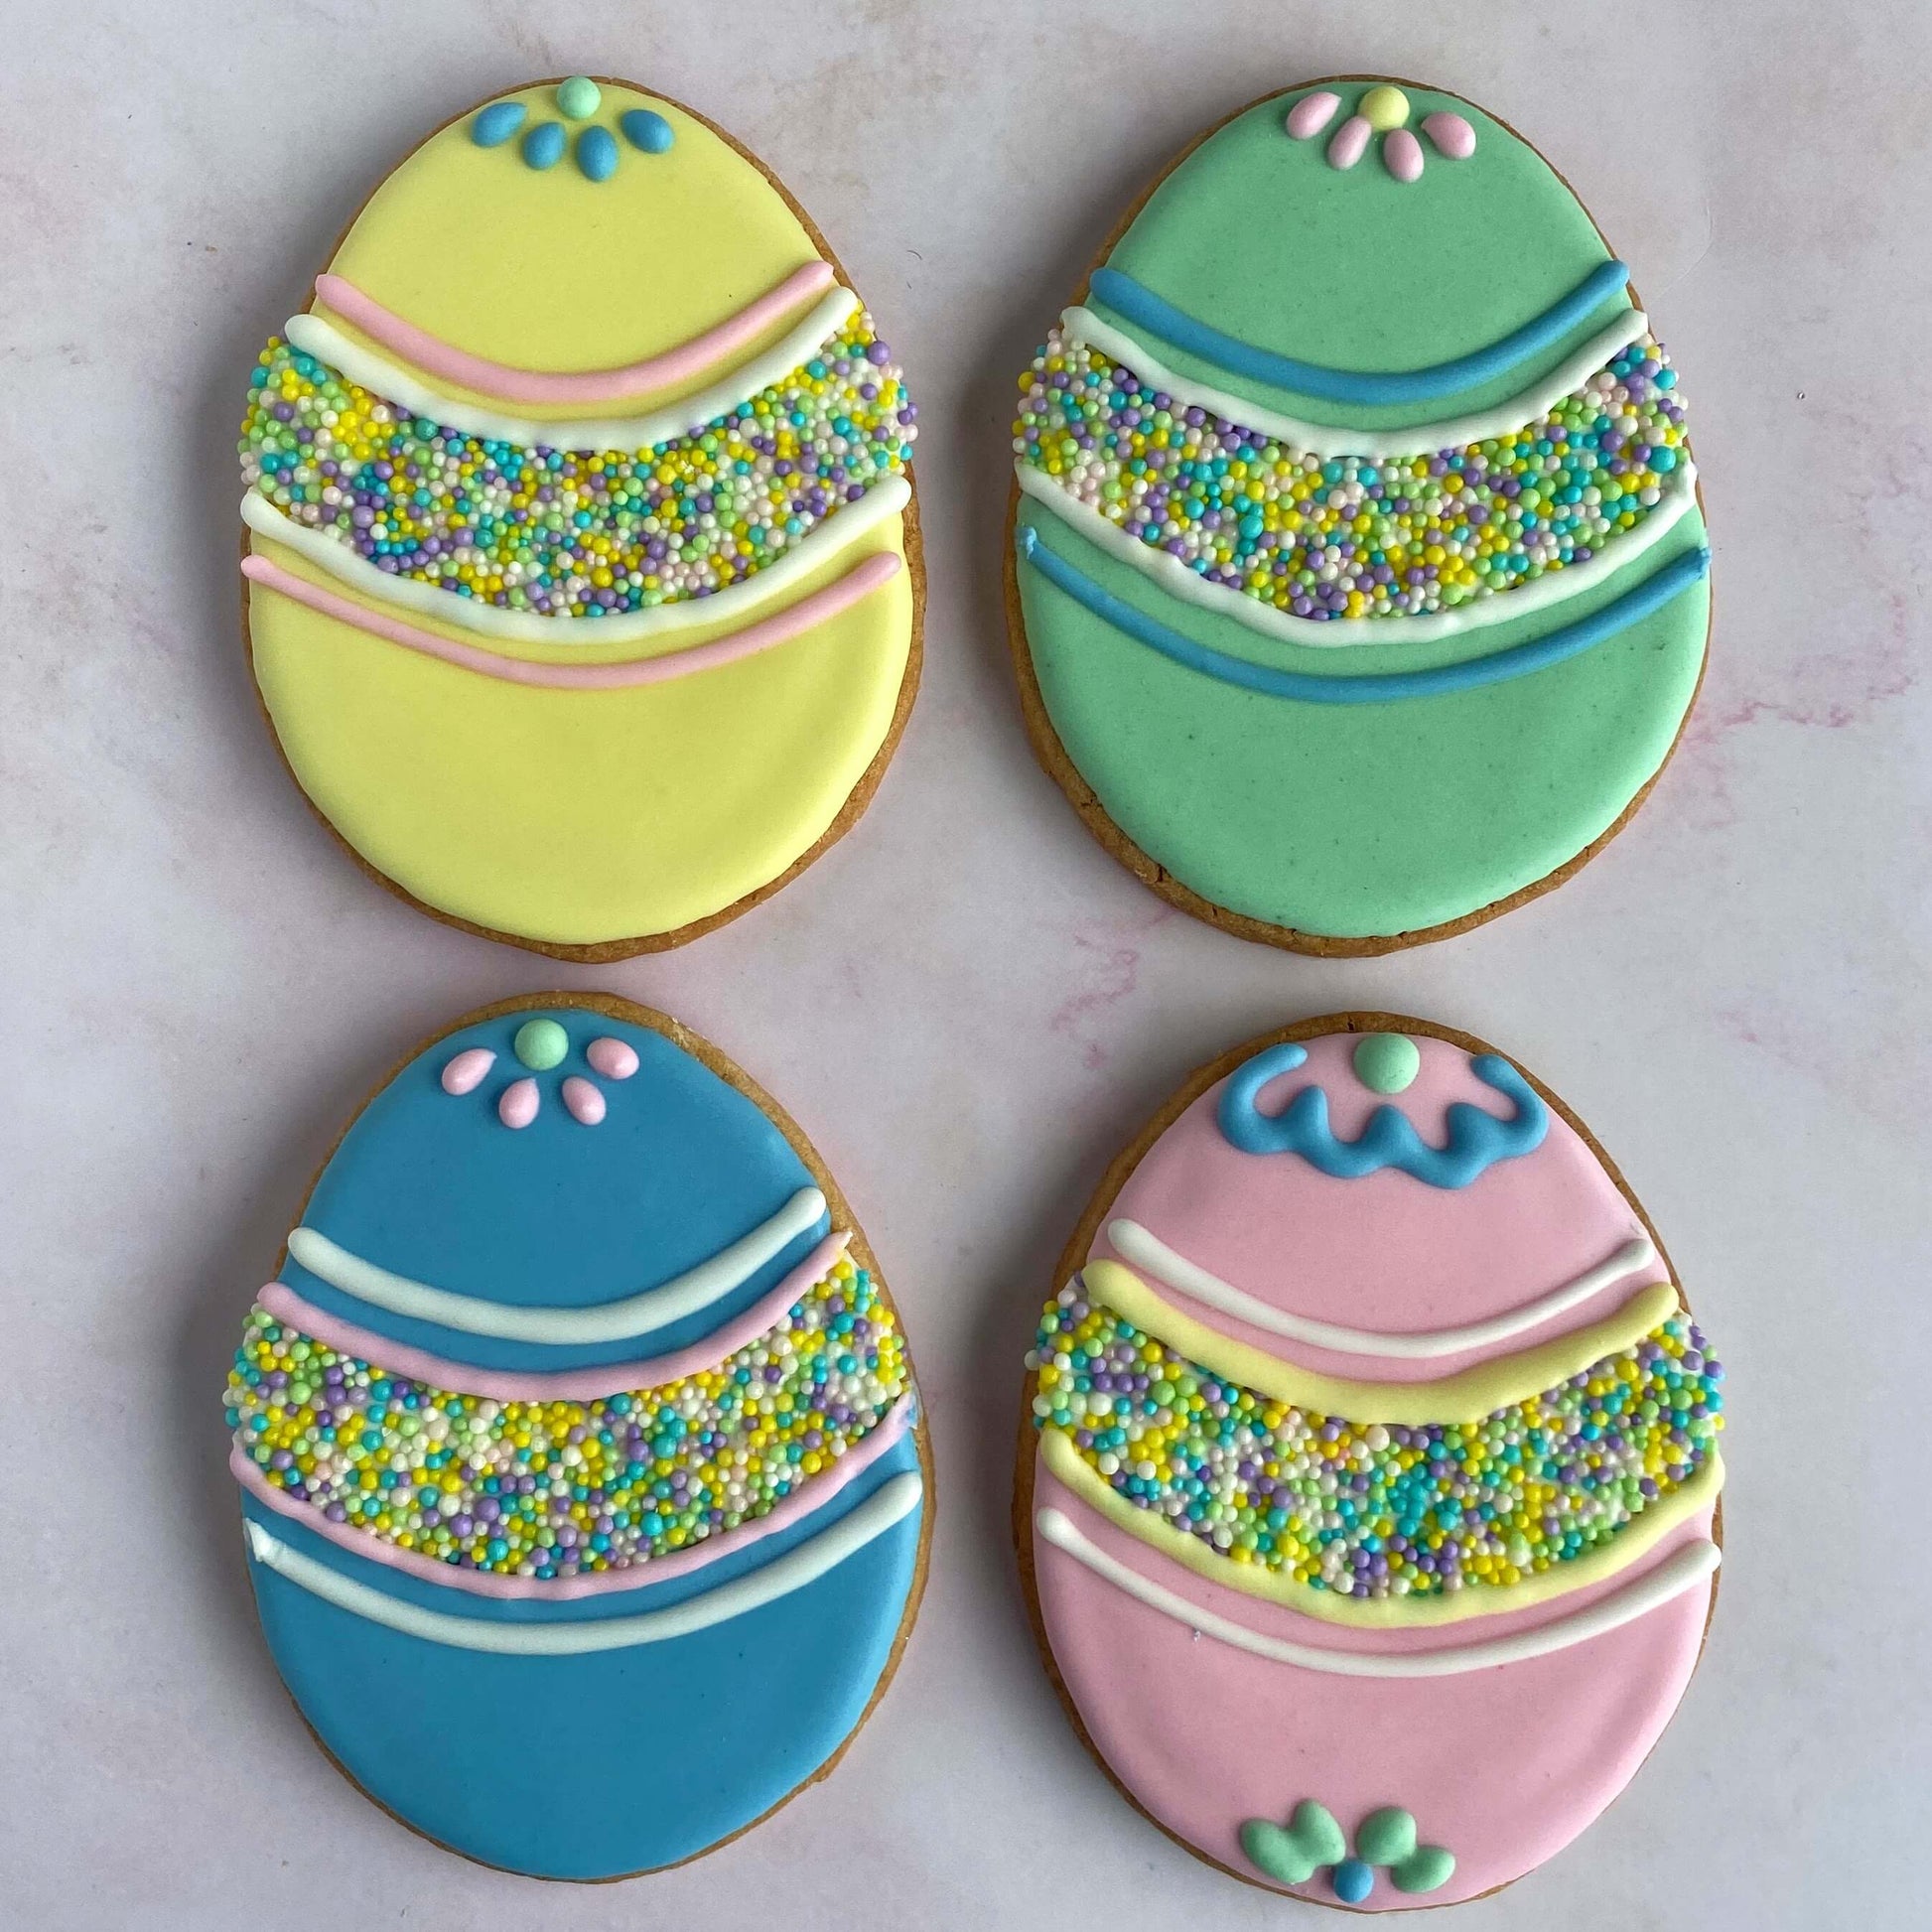 Decorated Easter Egg cookies